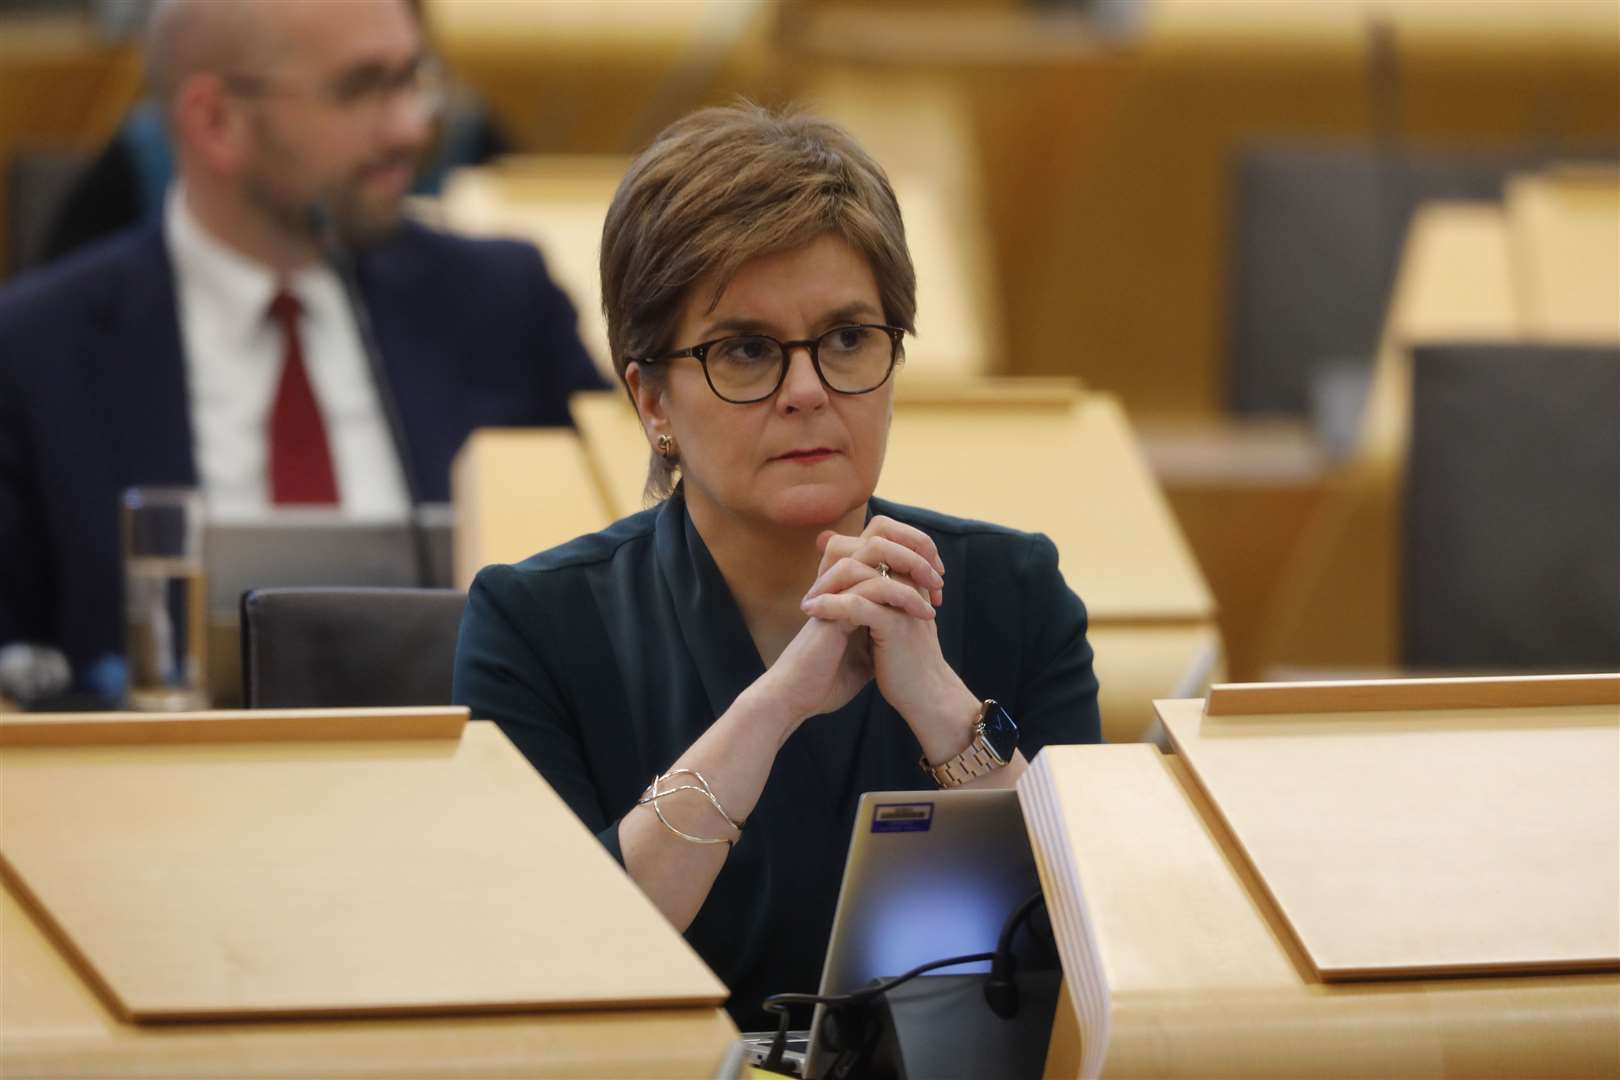 Nicola Sturgeon said her Government has ‘maximised’ what it can offer NHS staff (Andrew Cowan/Scottish Parliament/PA)